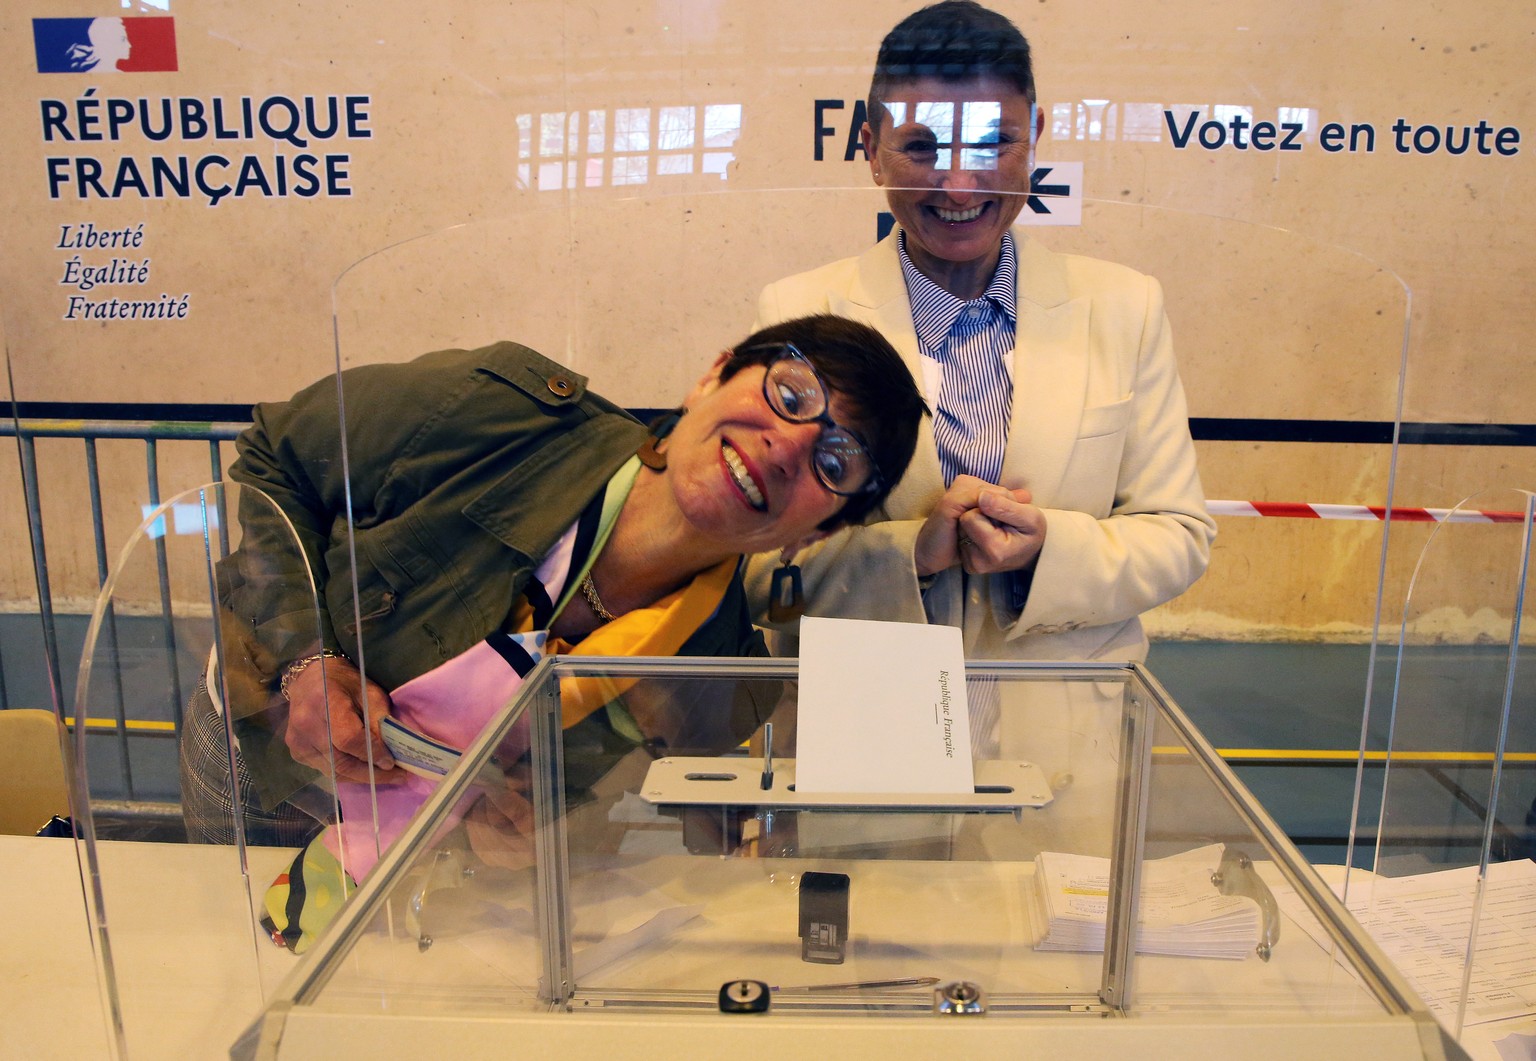 Volunteers react during the first round of the French presidential election, in Saint Pee sur Nivelle, France, Sunday, April 10, 2022. The polls opened at 8am in France for the first round of its pres ...